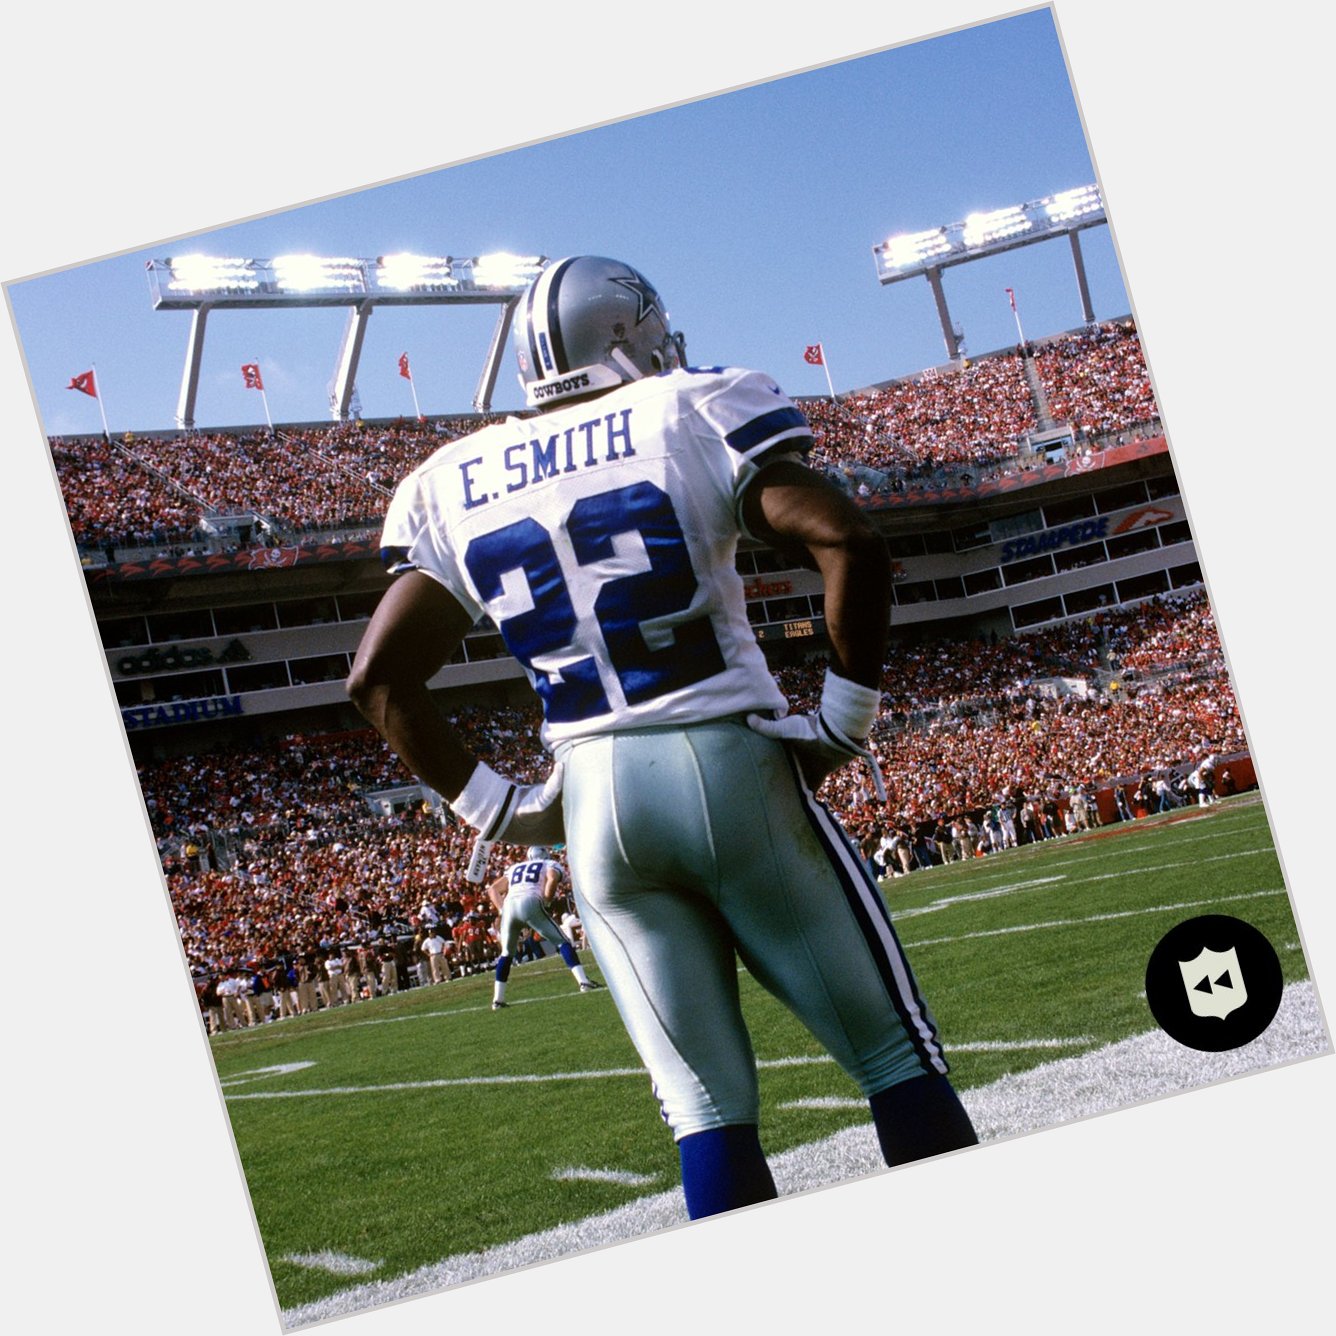 Happy Birthday to the legendary Emmitt Smith! He is a top __ RB of all-time.

